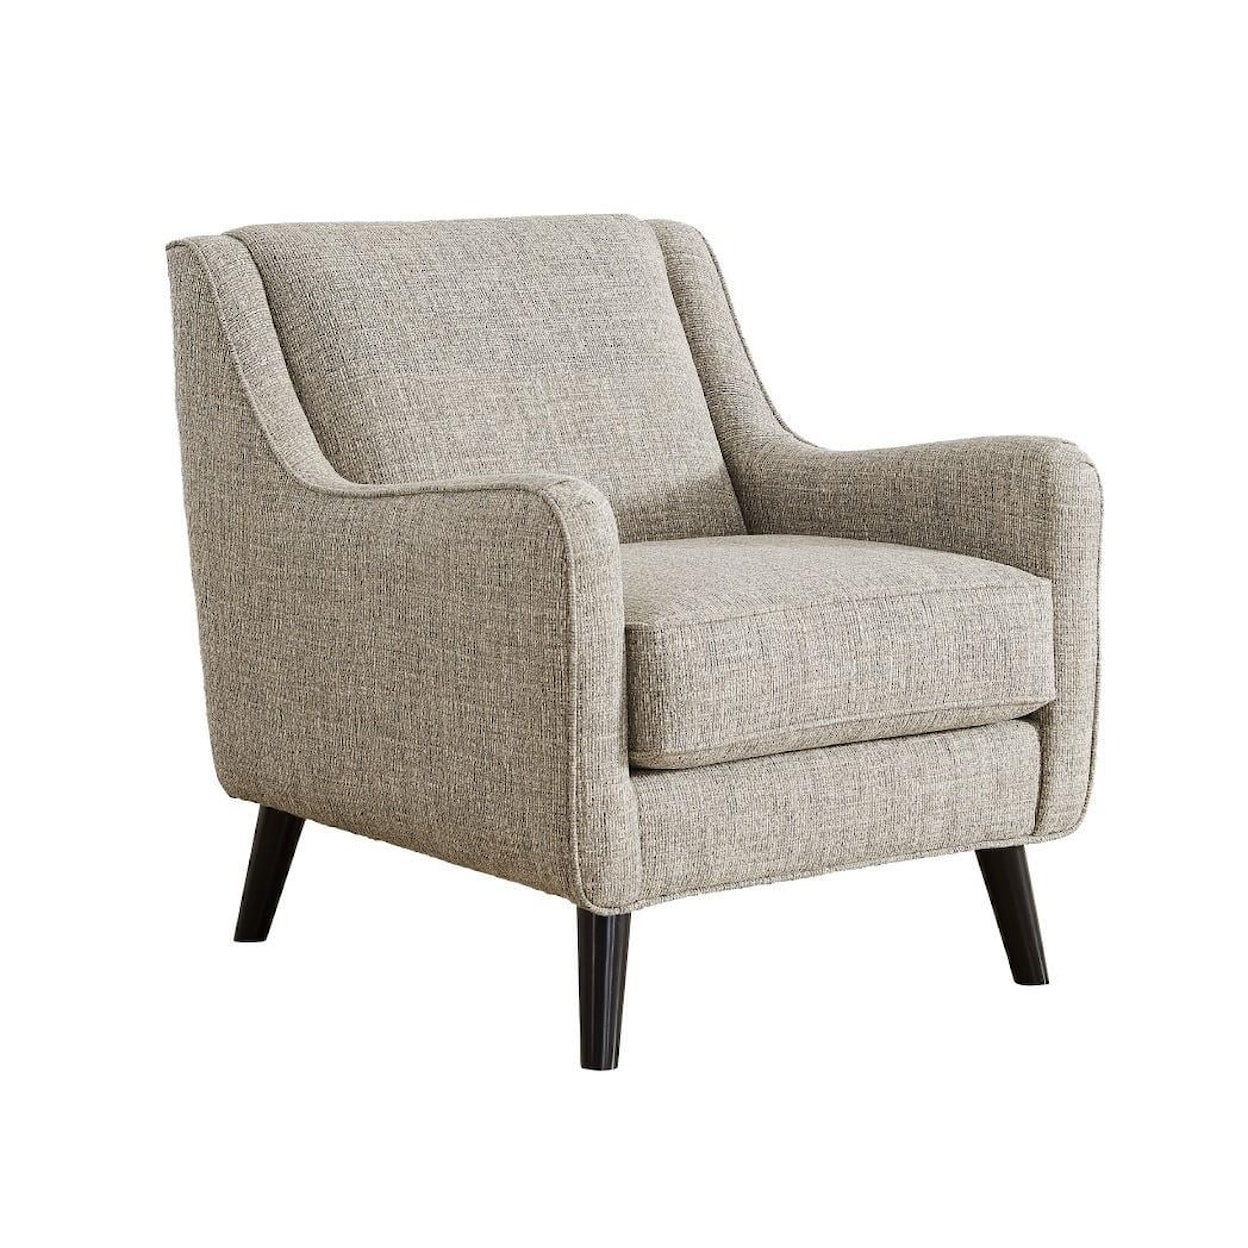 Fusion Furniture 4200 OUTLIER MUSHROOM Accent Chair with Exposed Tapered Legs